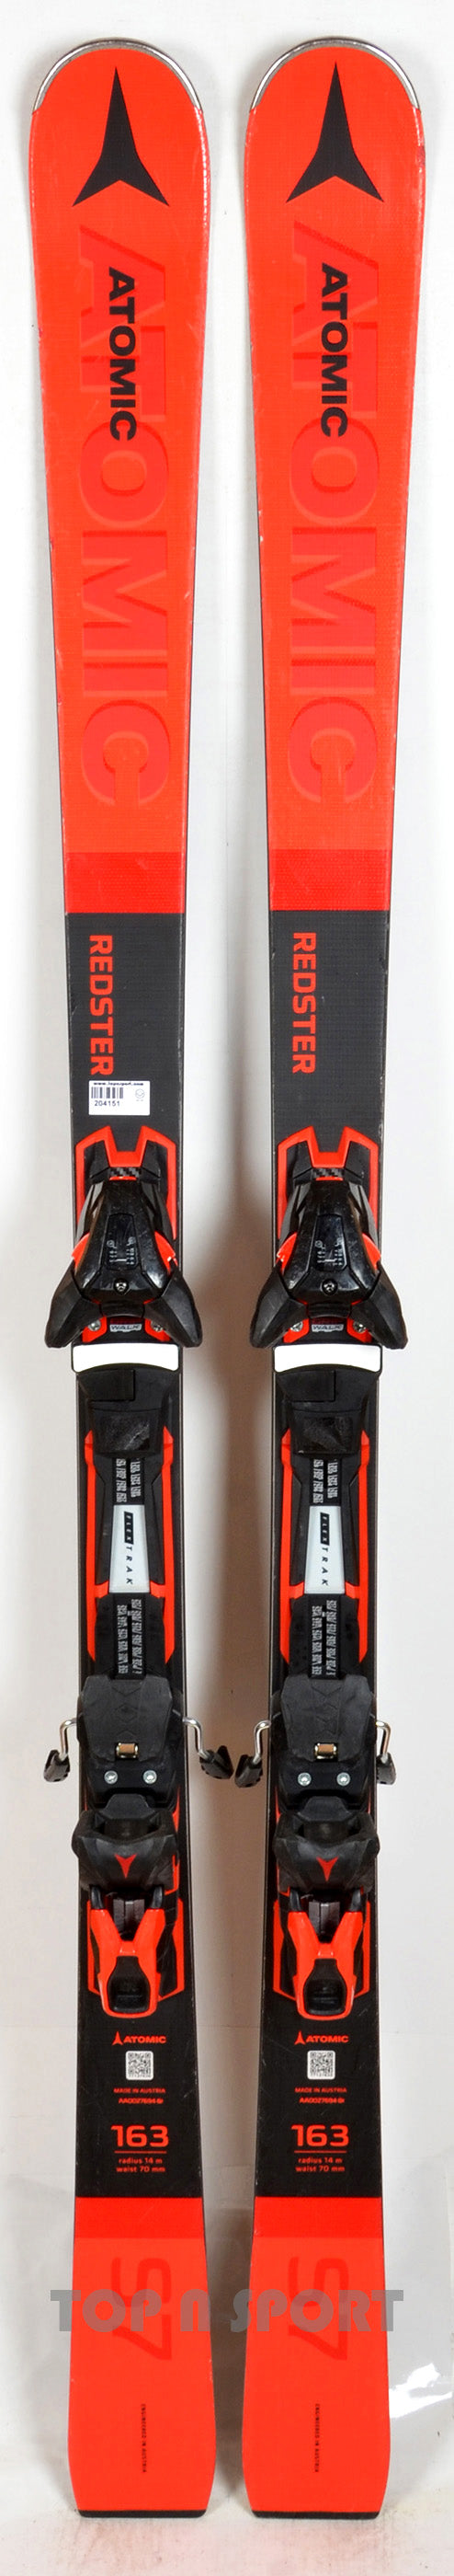 Atomic REDSTER S7 - skis d'occasion